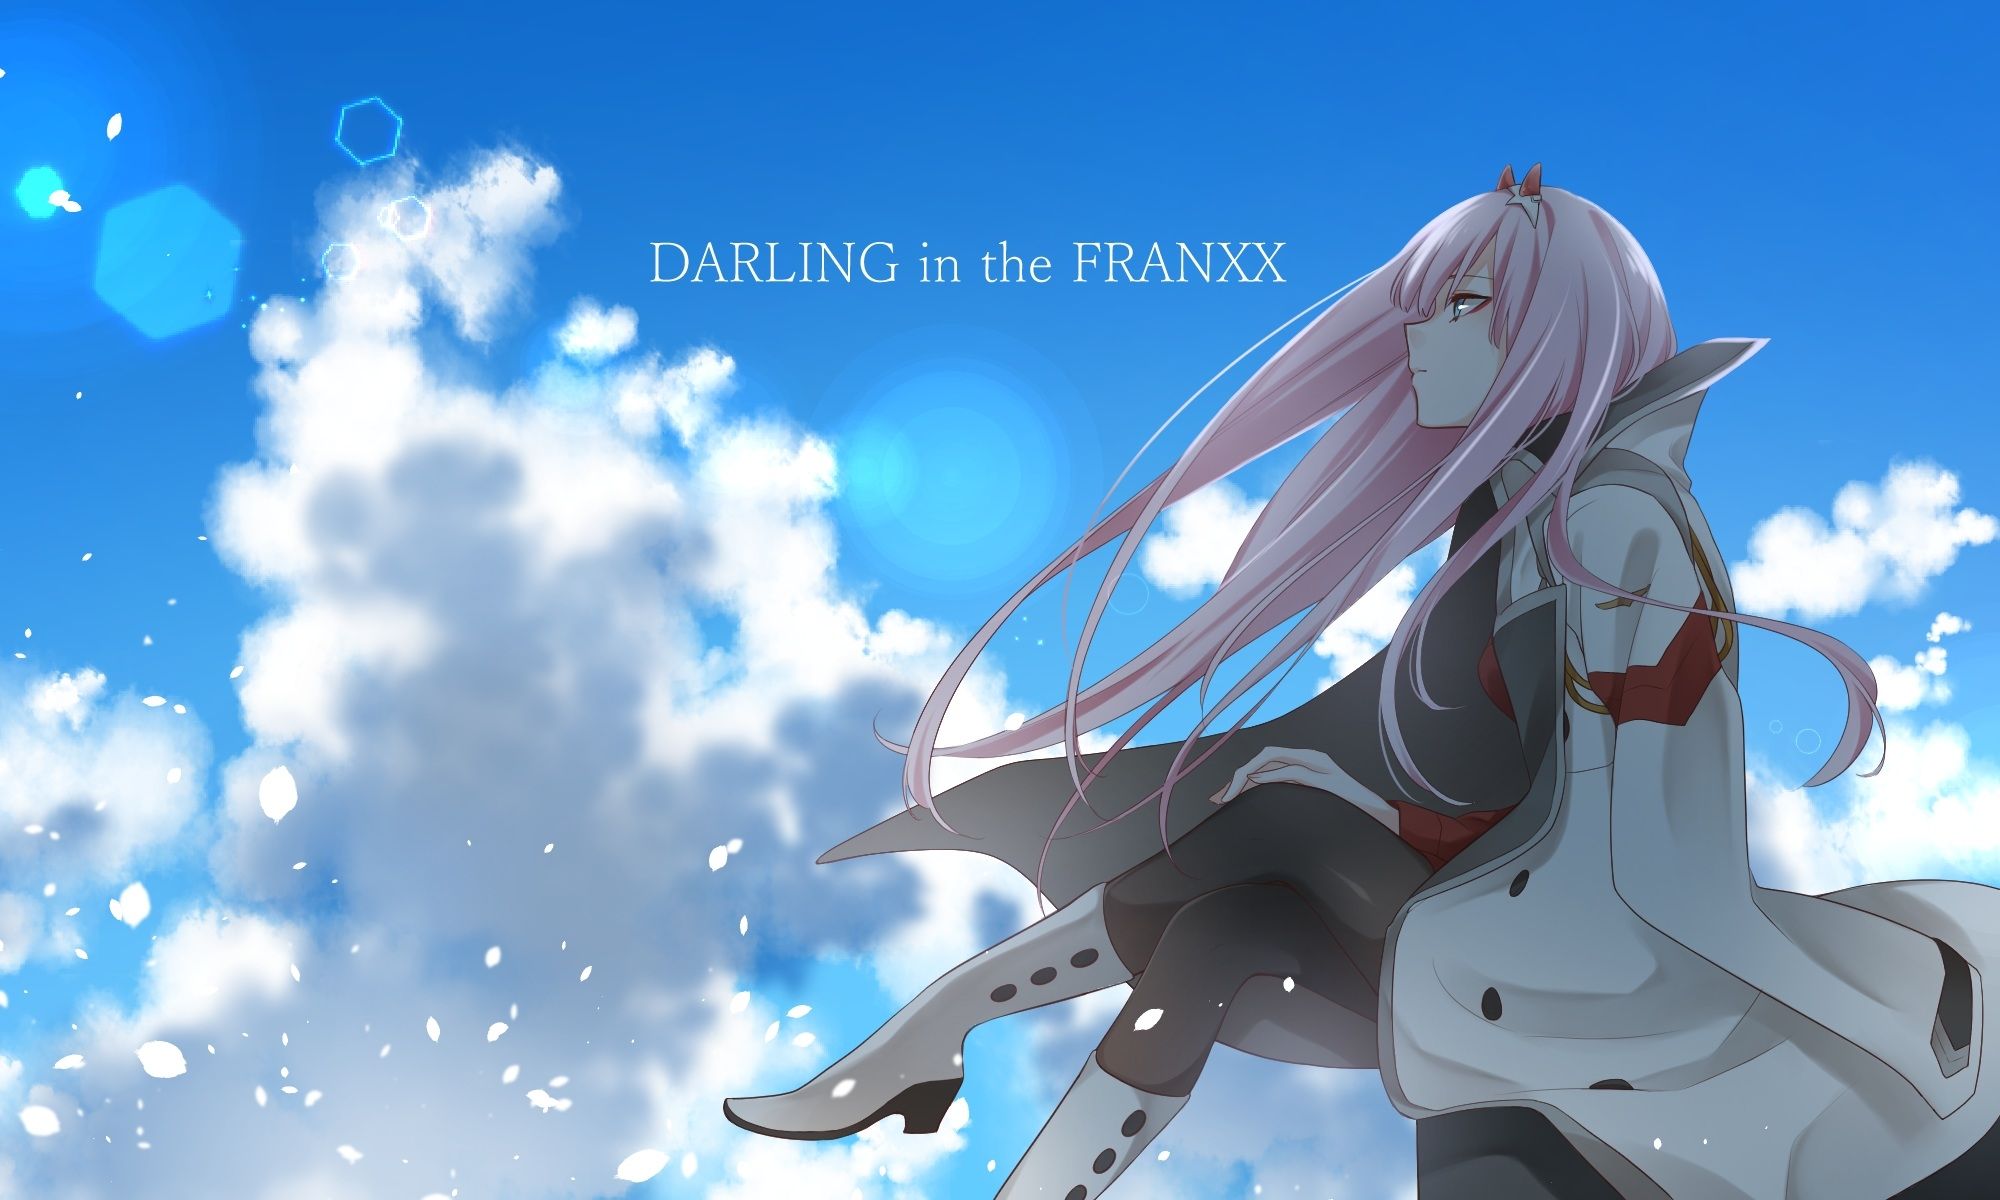 Download 2000x1200 Darling In The Franxx, Zero Two, Pink Hair, Clouds, Profile View, Coat Wallpapers